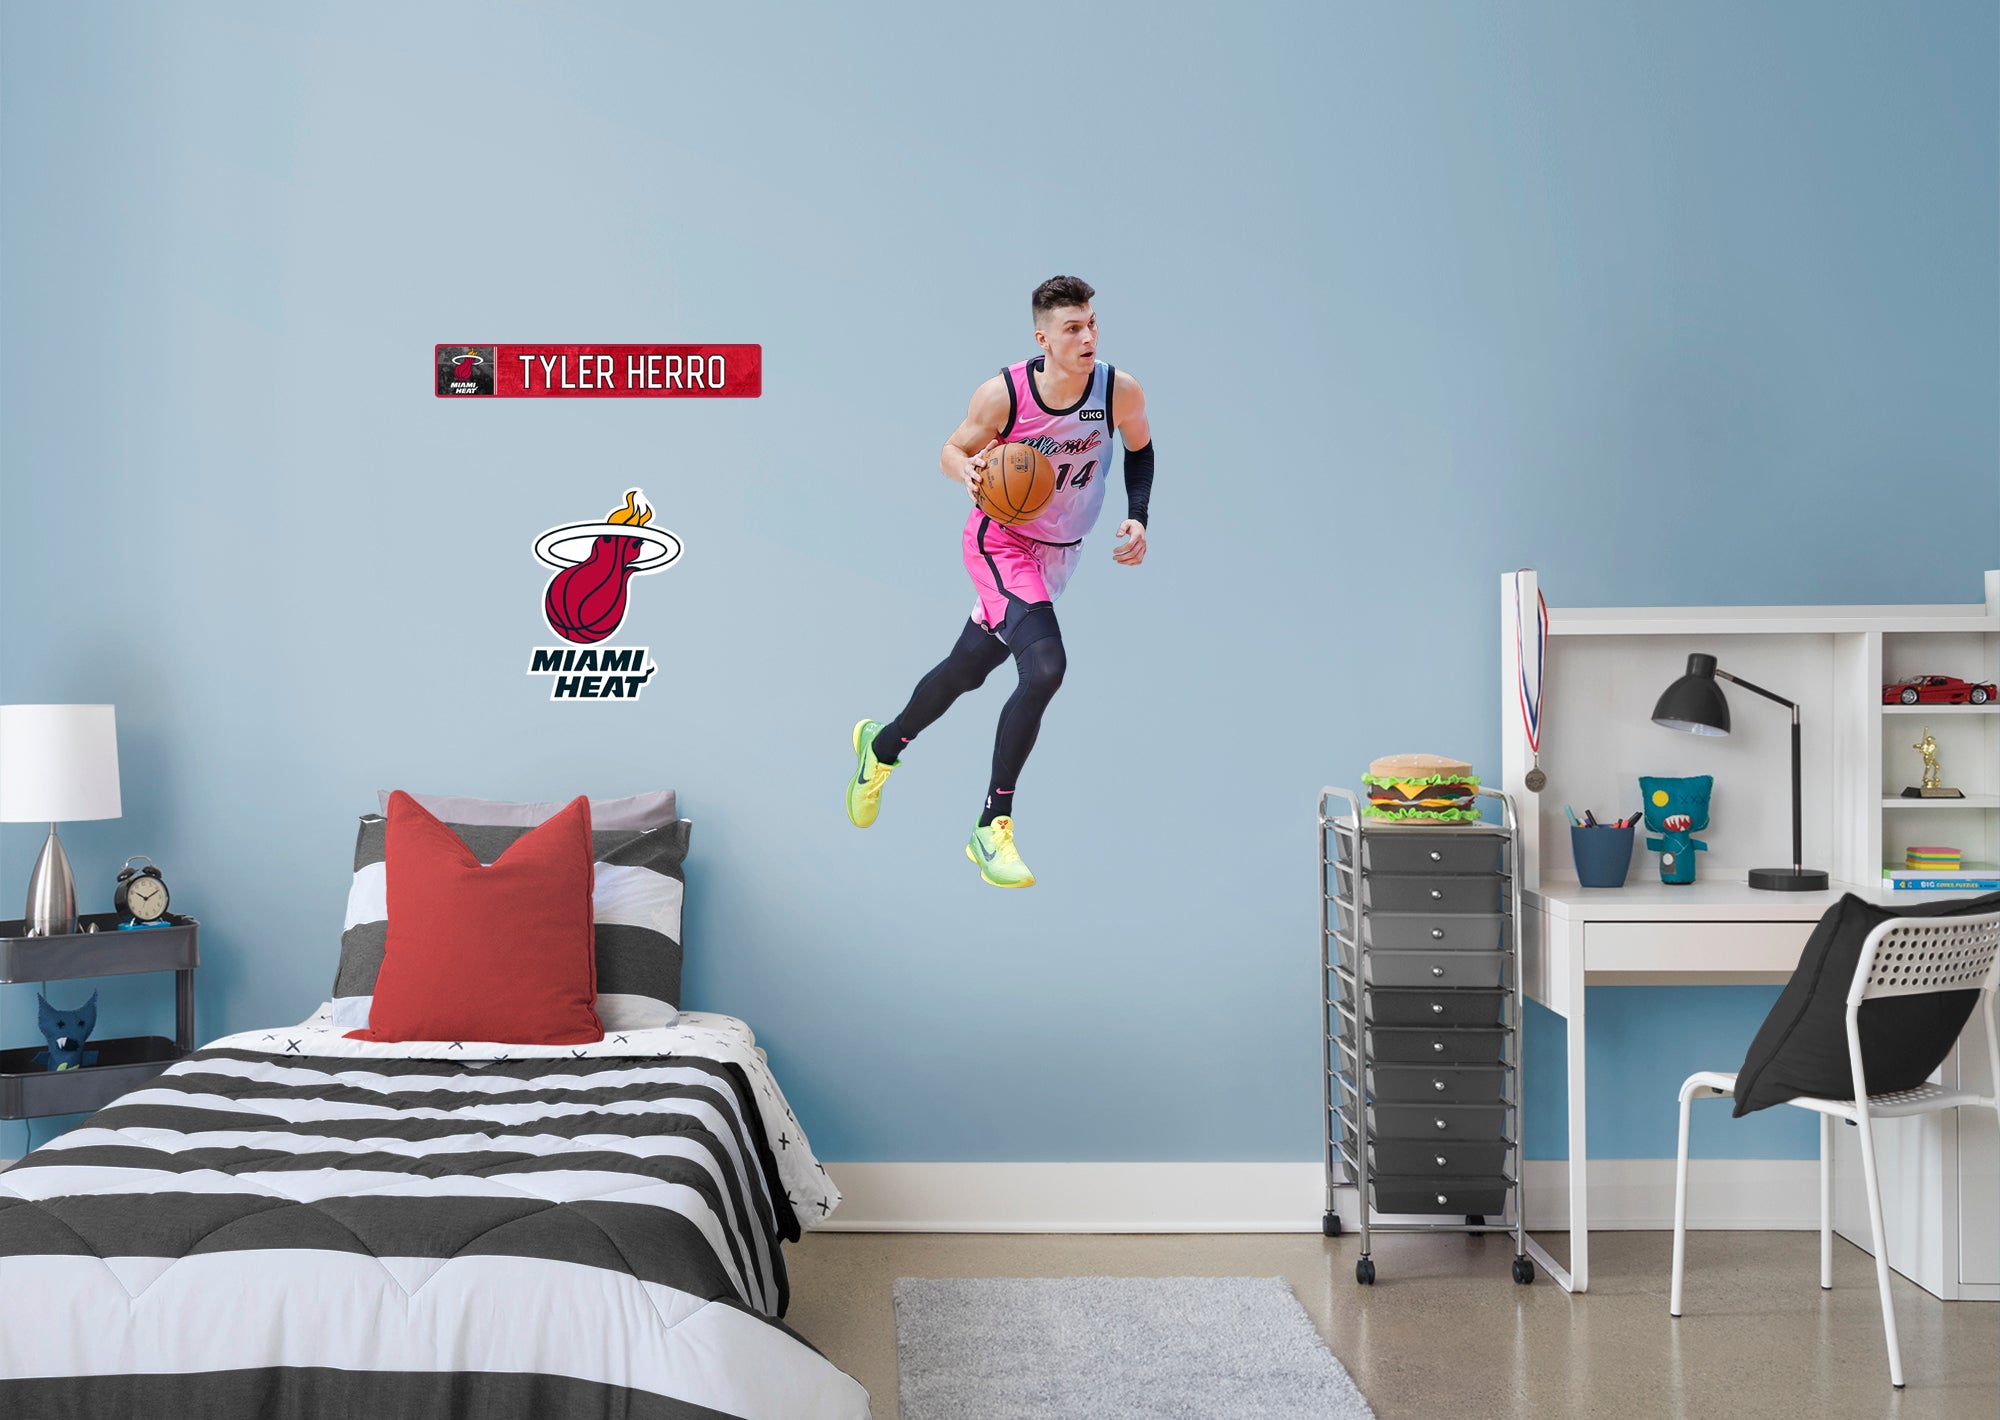 Tyler Herro 2021 Vice City for Miami Heat - Officially Licensed NBA Removable Wall Decal Giant Athlete + 2 Decals (20"W x50"H) b